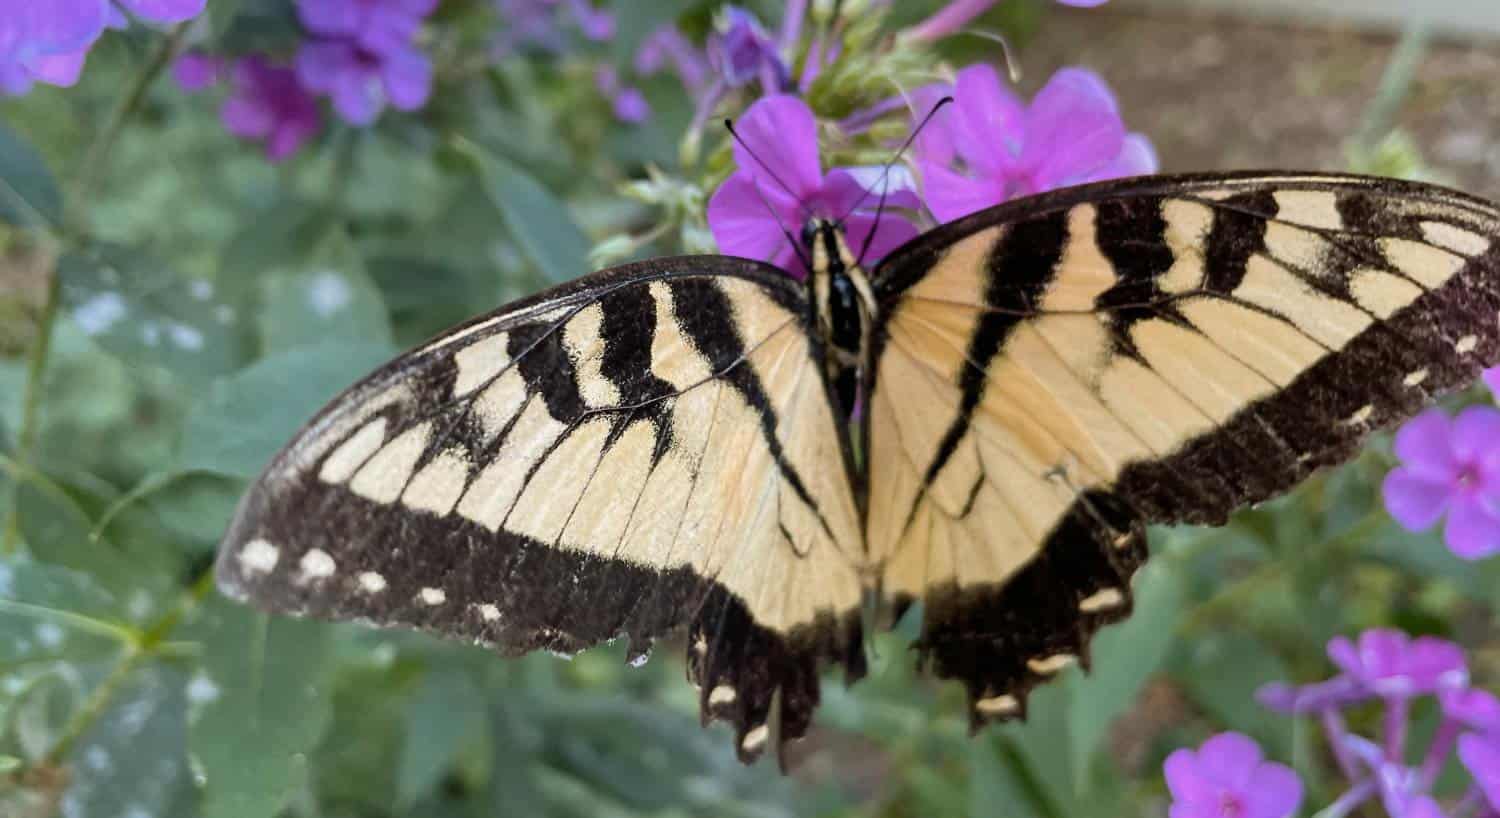 Close up view of yellow and black butterfly sitting on a purple flower